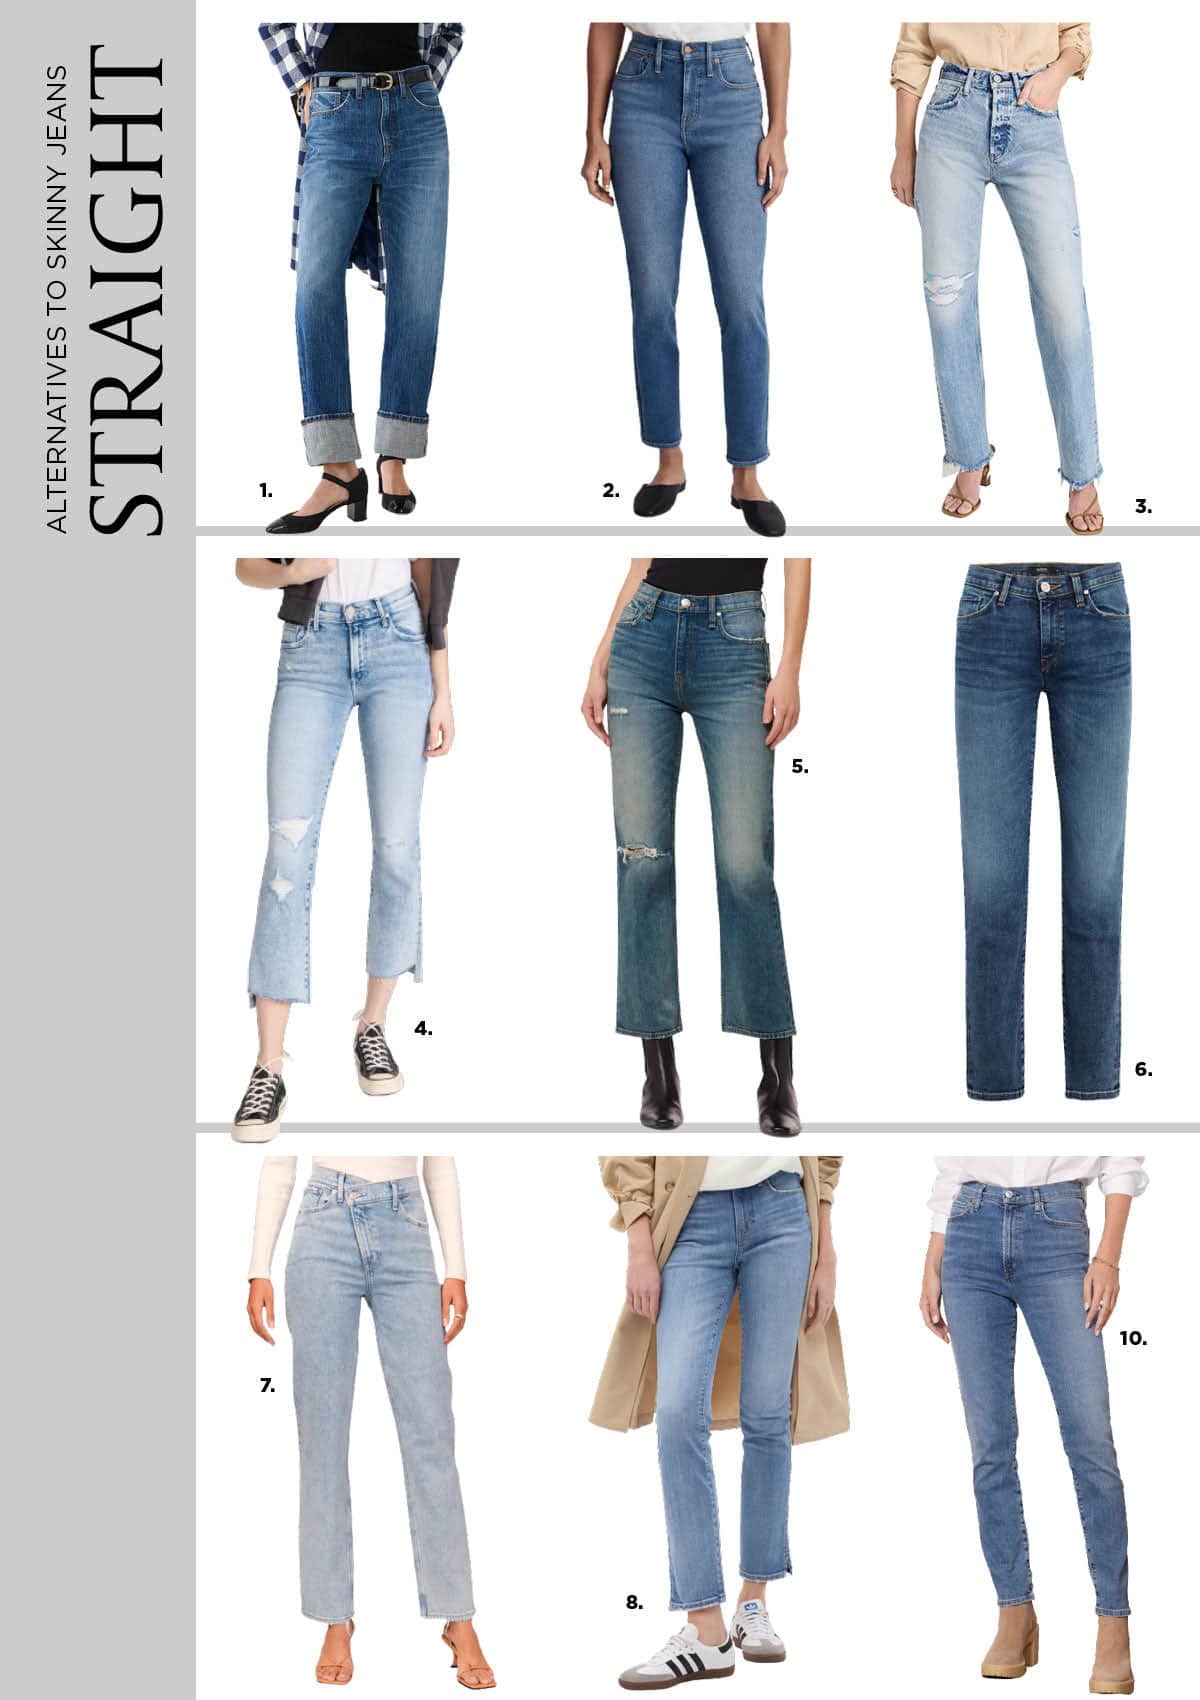 Are Skinny Jeans Still In Style? Or Are They Out?